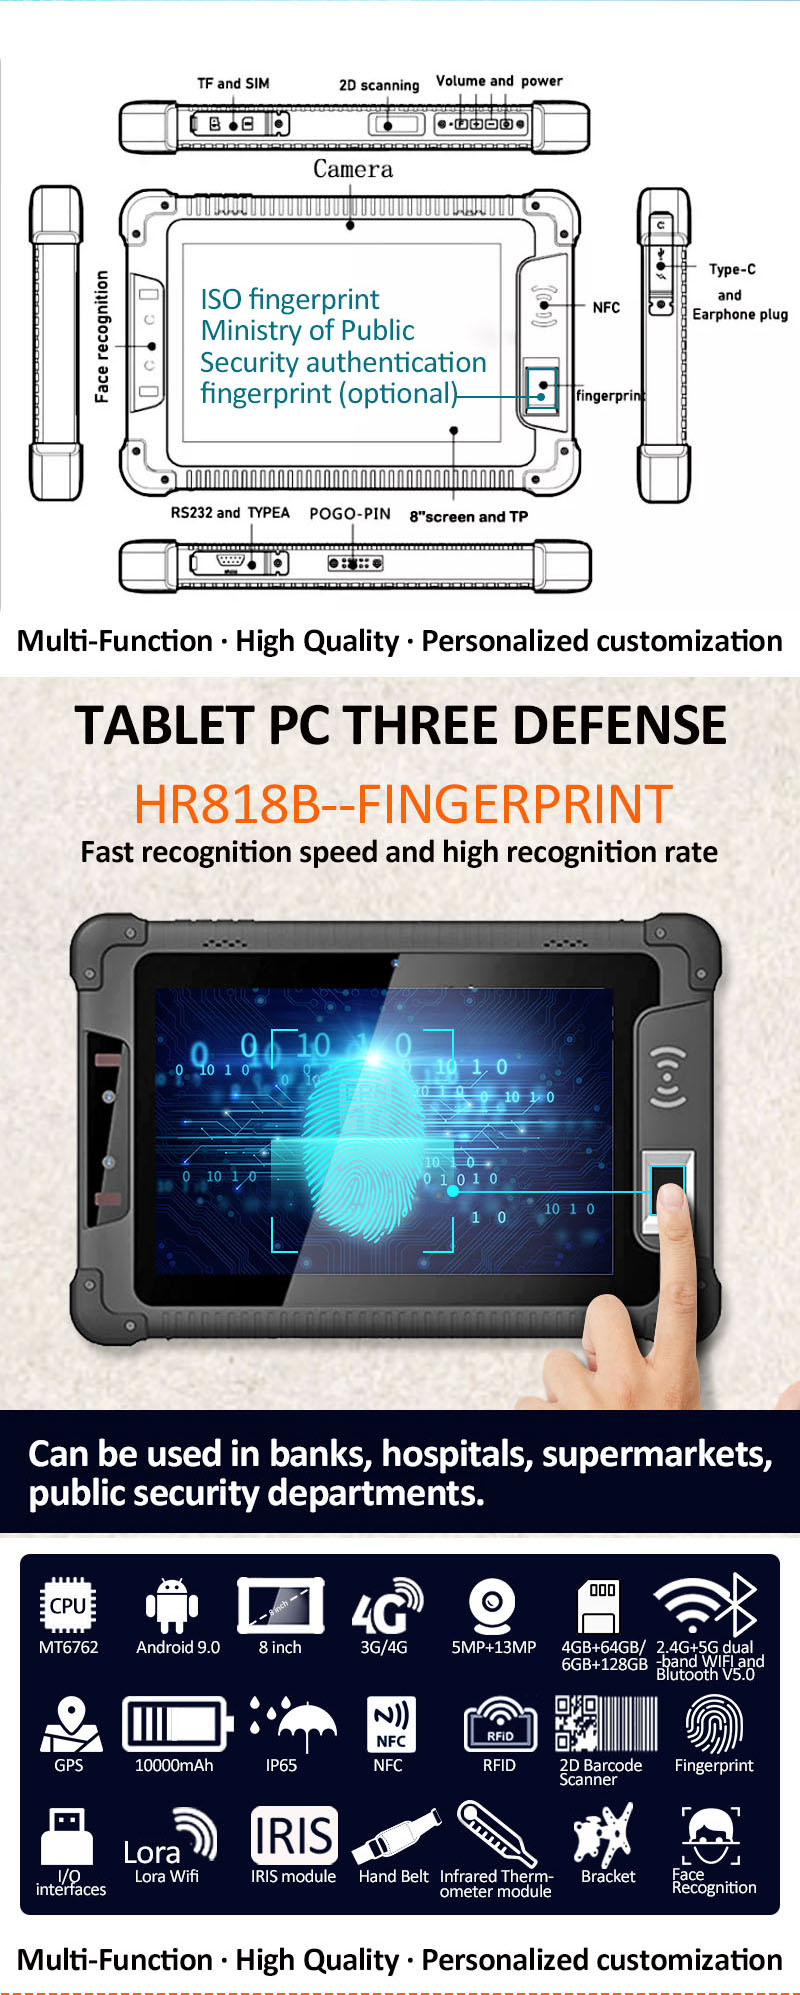 , 8 inch Android Rugged Tablet with NFC Fingerprint Barcode scanner